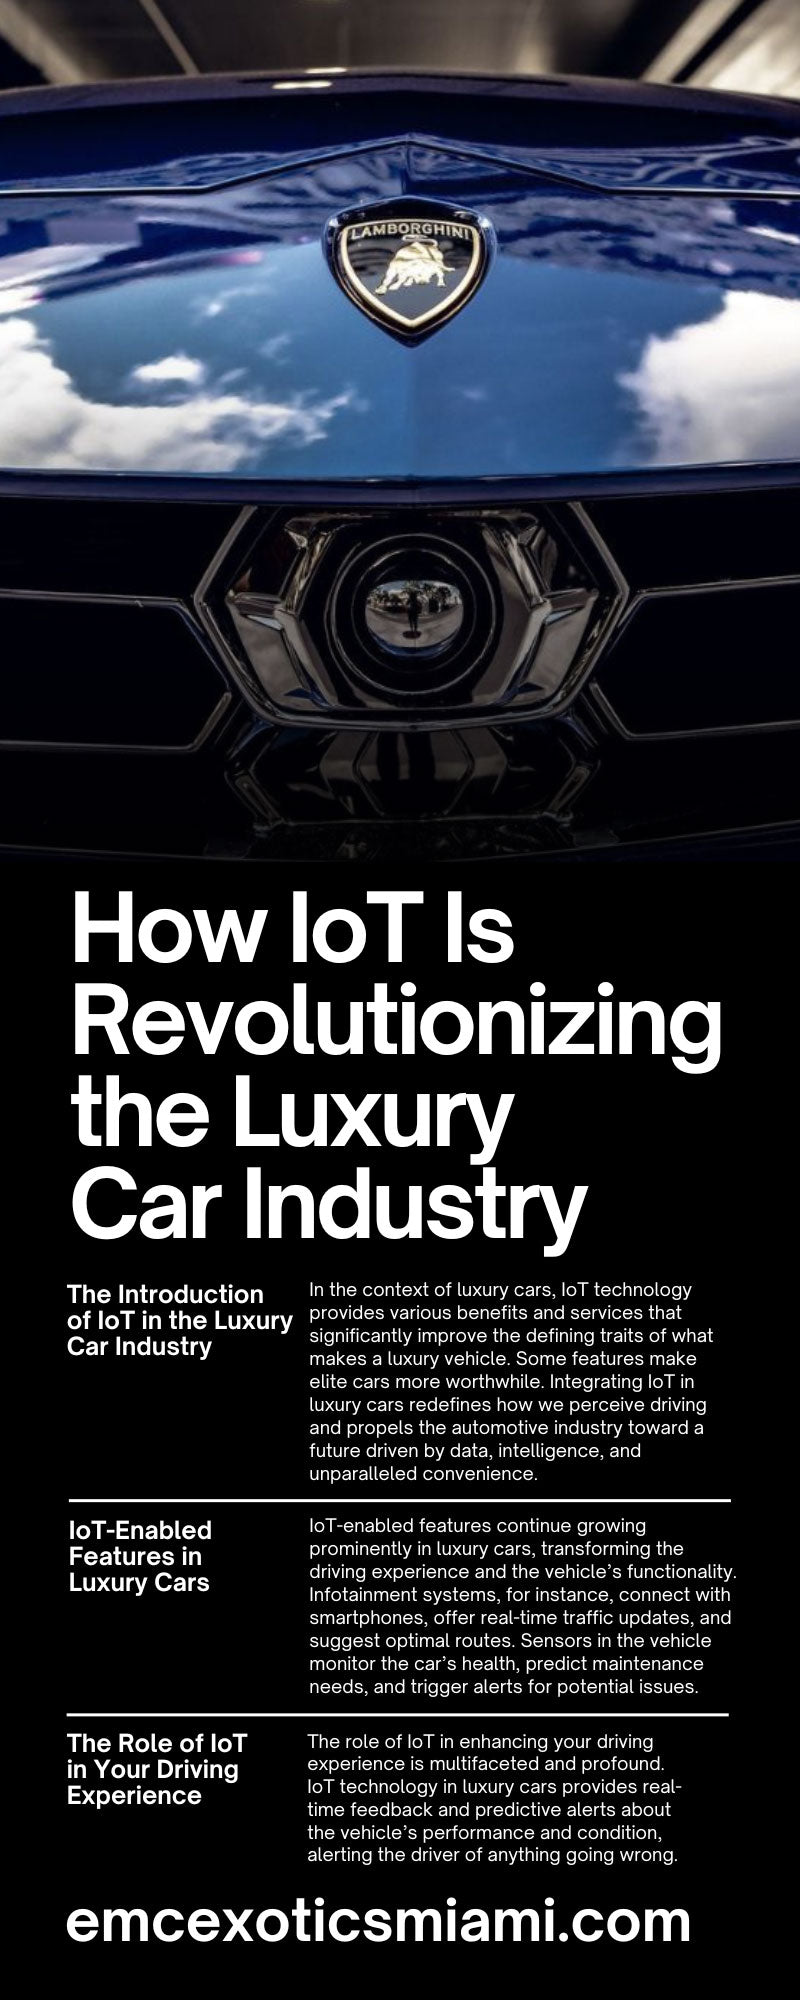 How IoT Is Revolutionizing the Luxury Car Industry